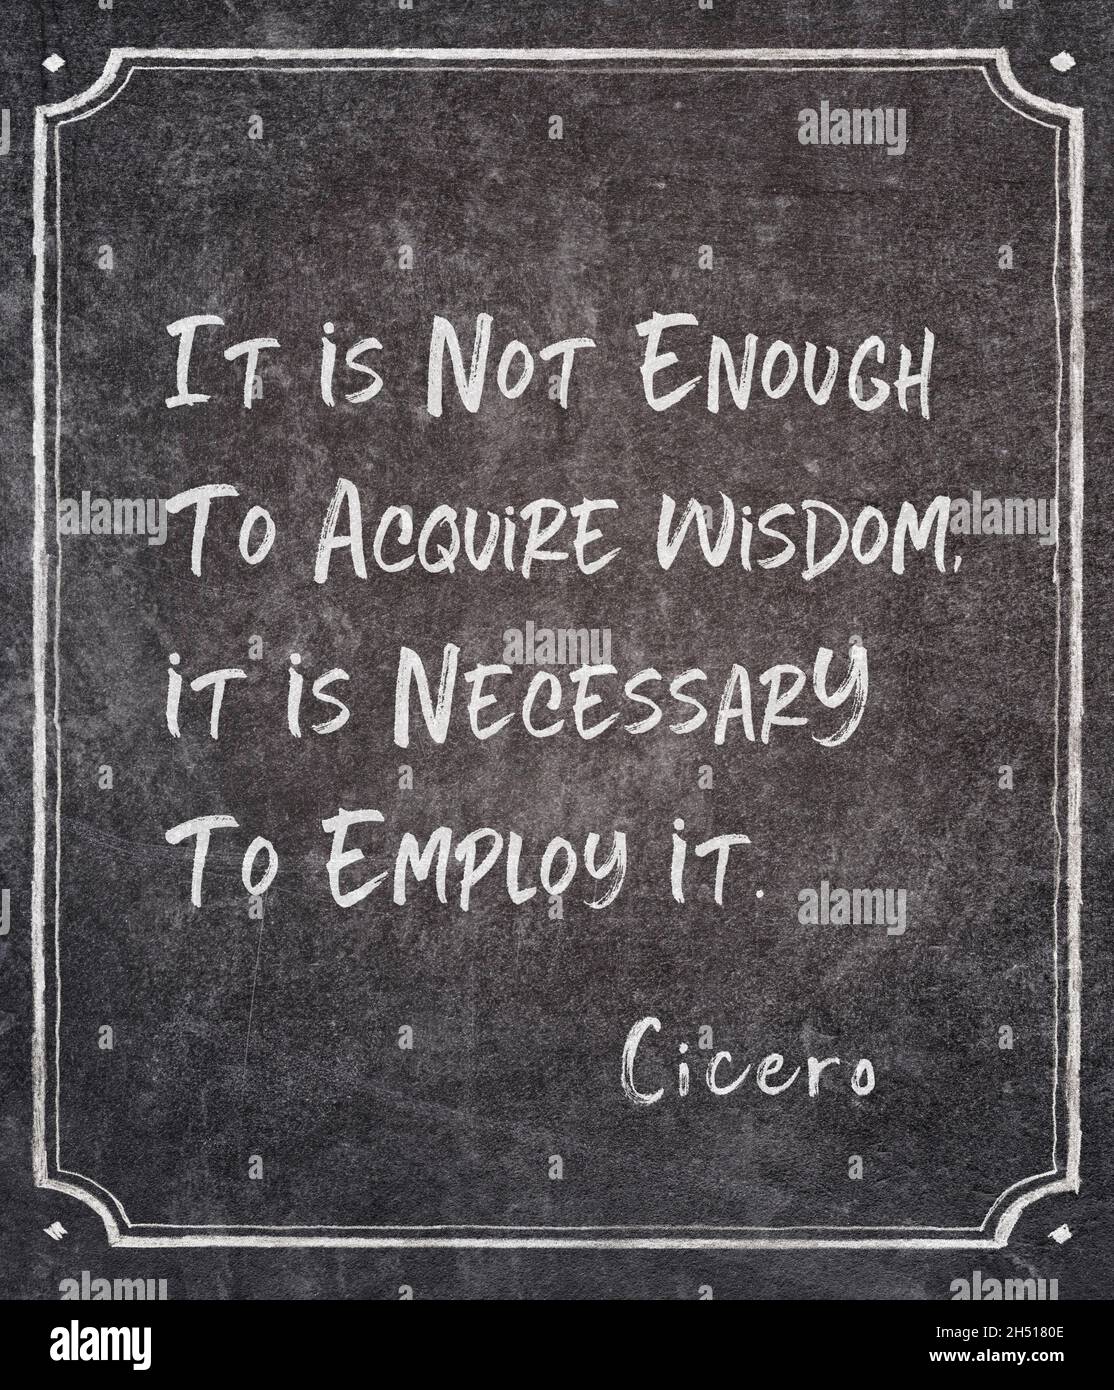 It is not enough to acquire wisdom, it is necessary to employ it - ancient Roman philosopher Cicero quote written on framed chalkboard Stock Photo